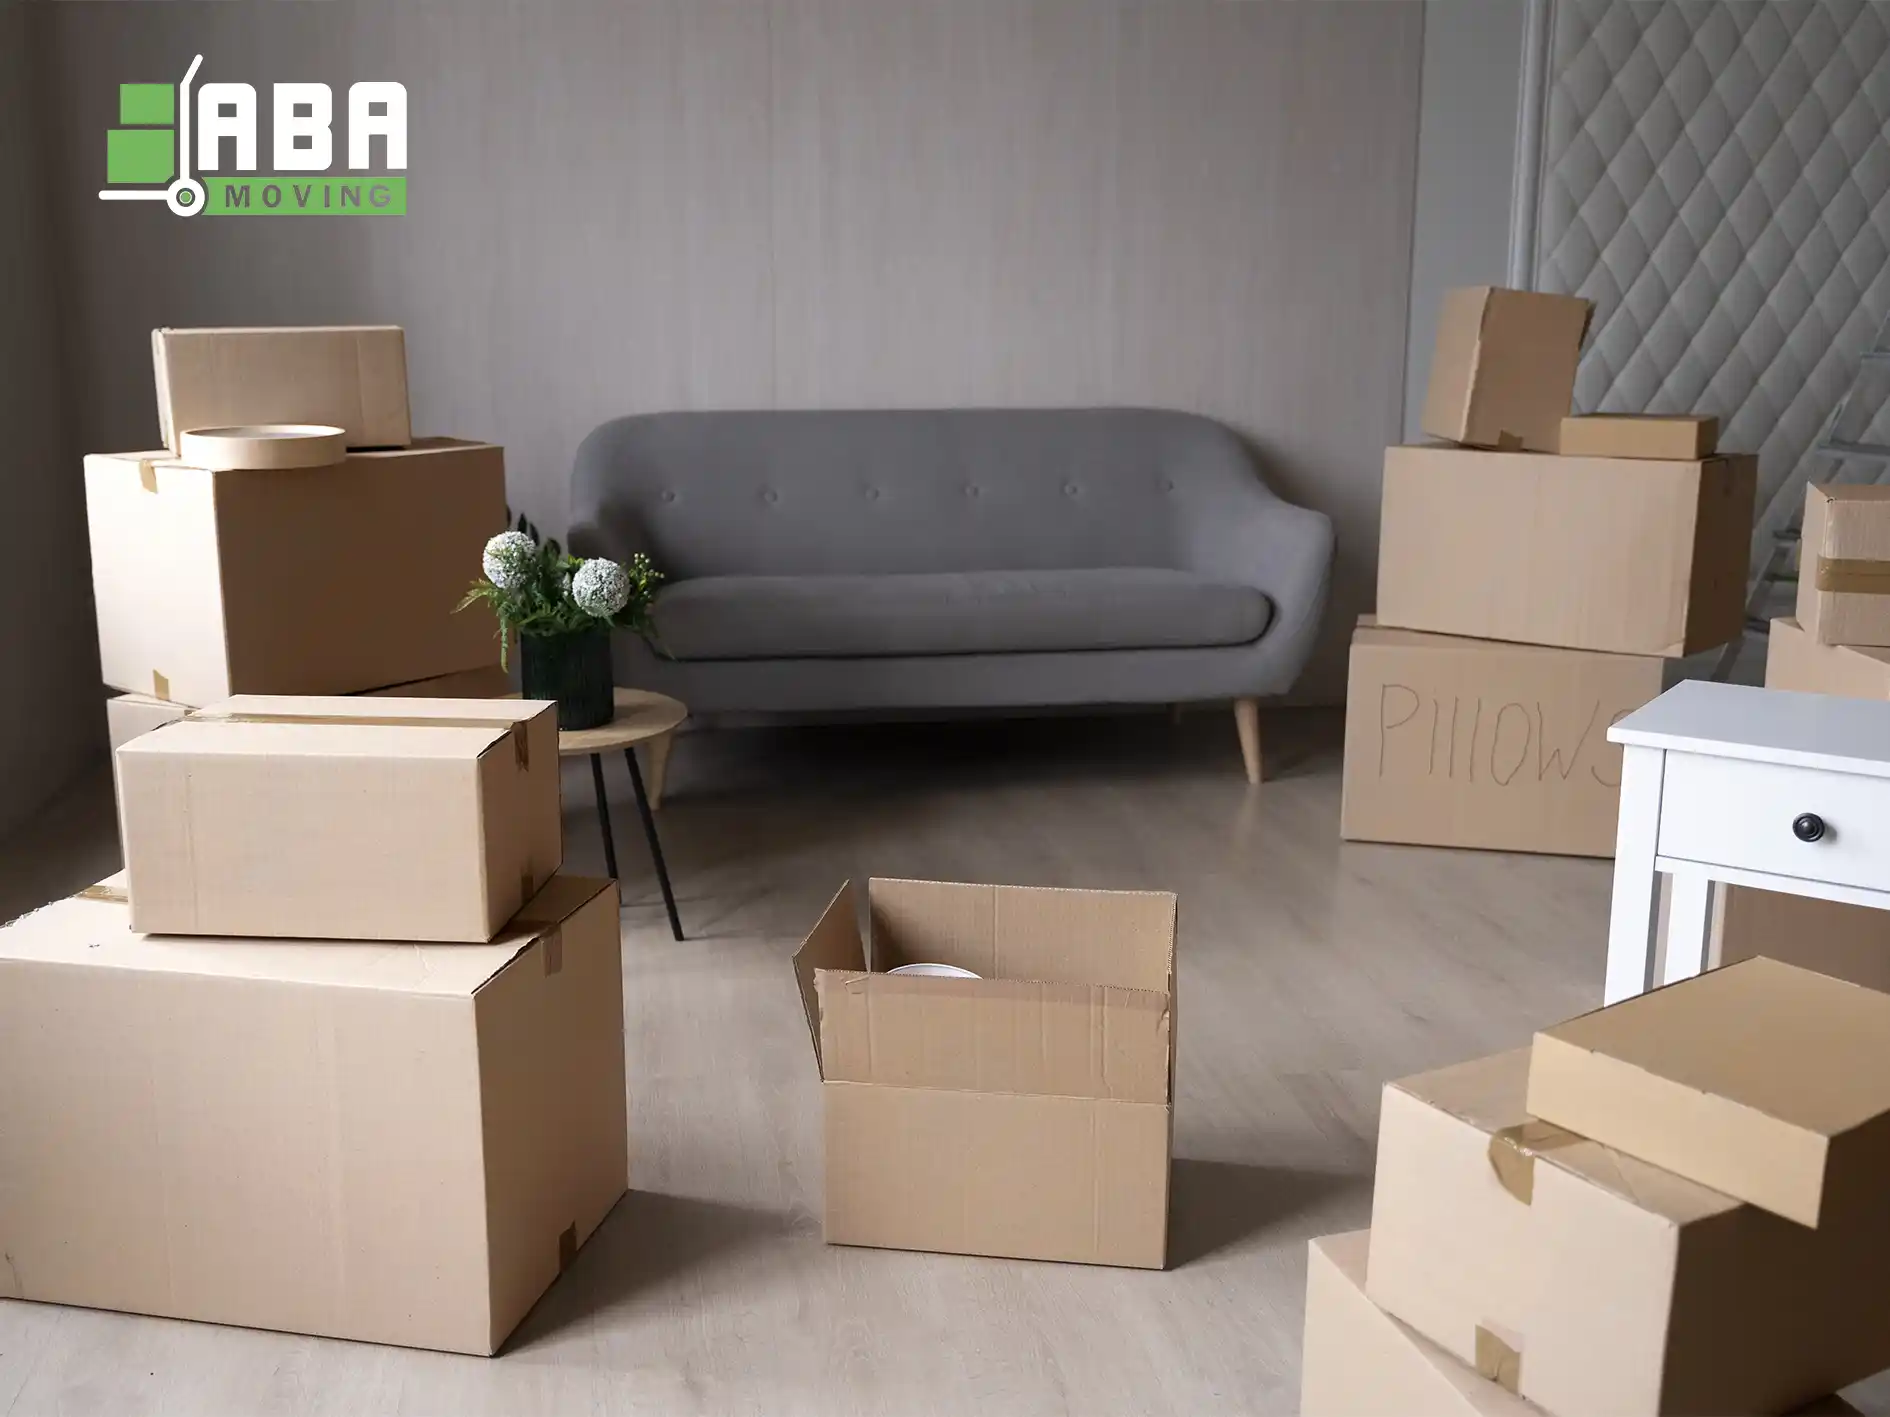 ABA Movers Relocation Boxes